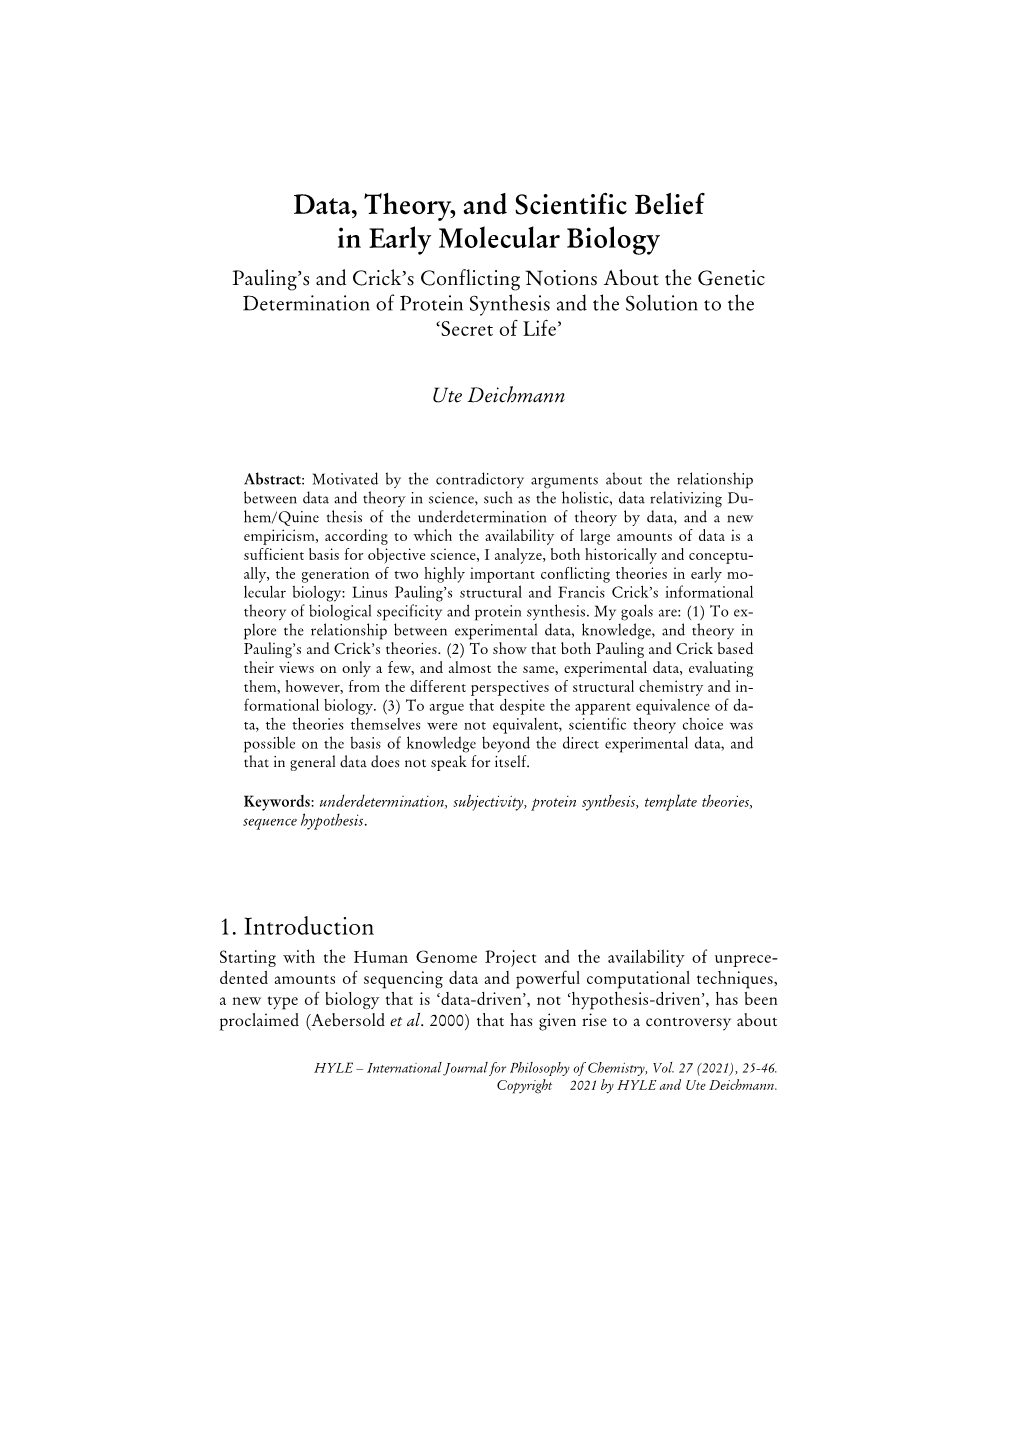 Data, Theory, and Scientific Belief in Early Molecular Biology